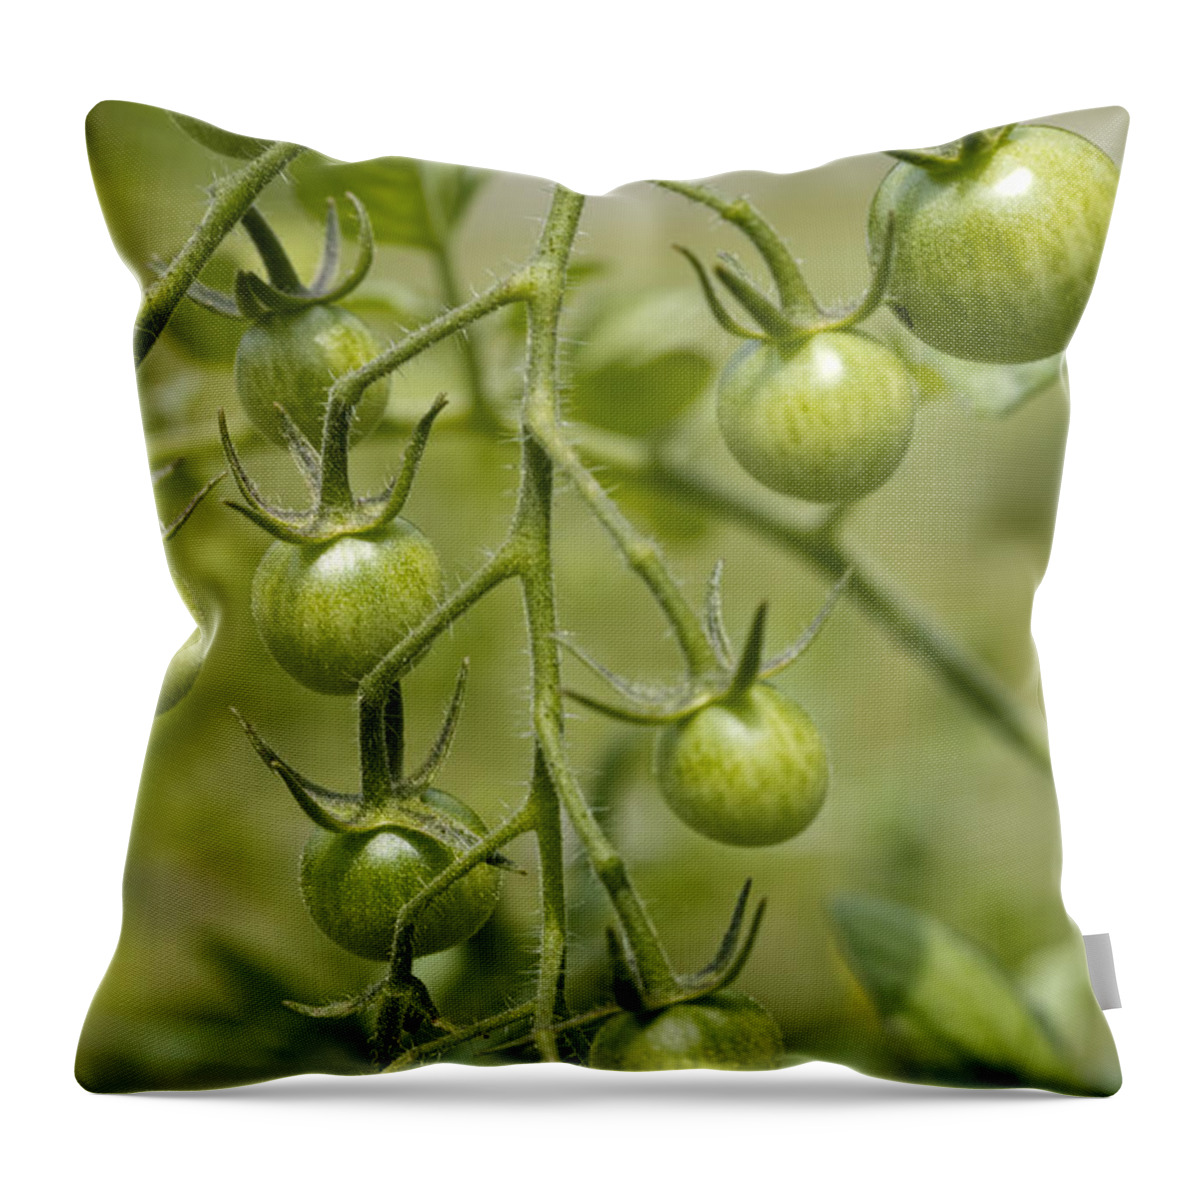 Green Throw Pillow featuring the photograph Still Green by Kathy Clark